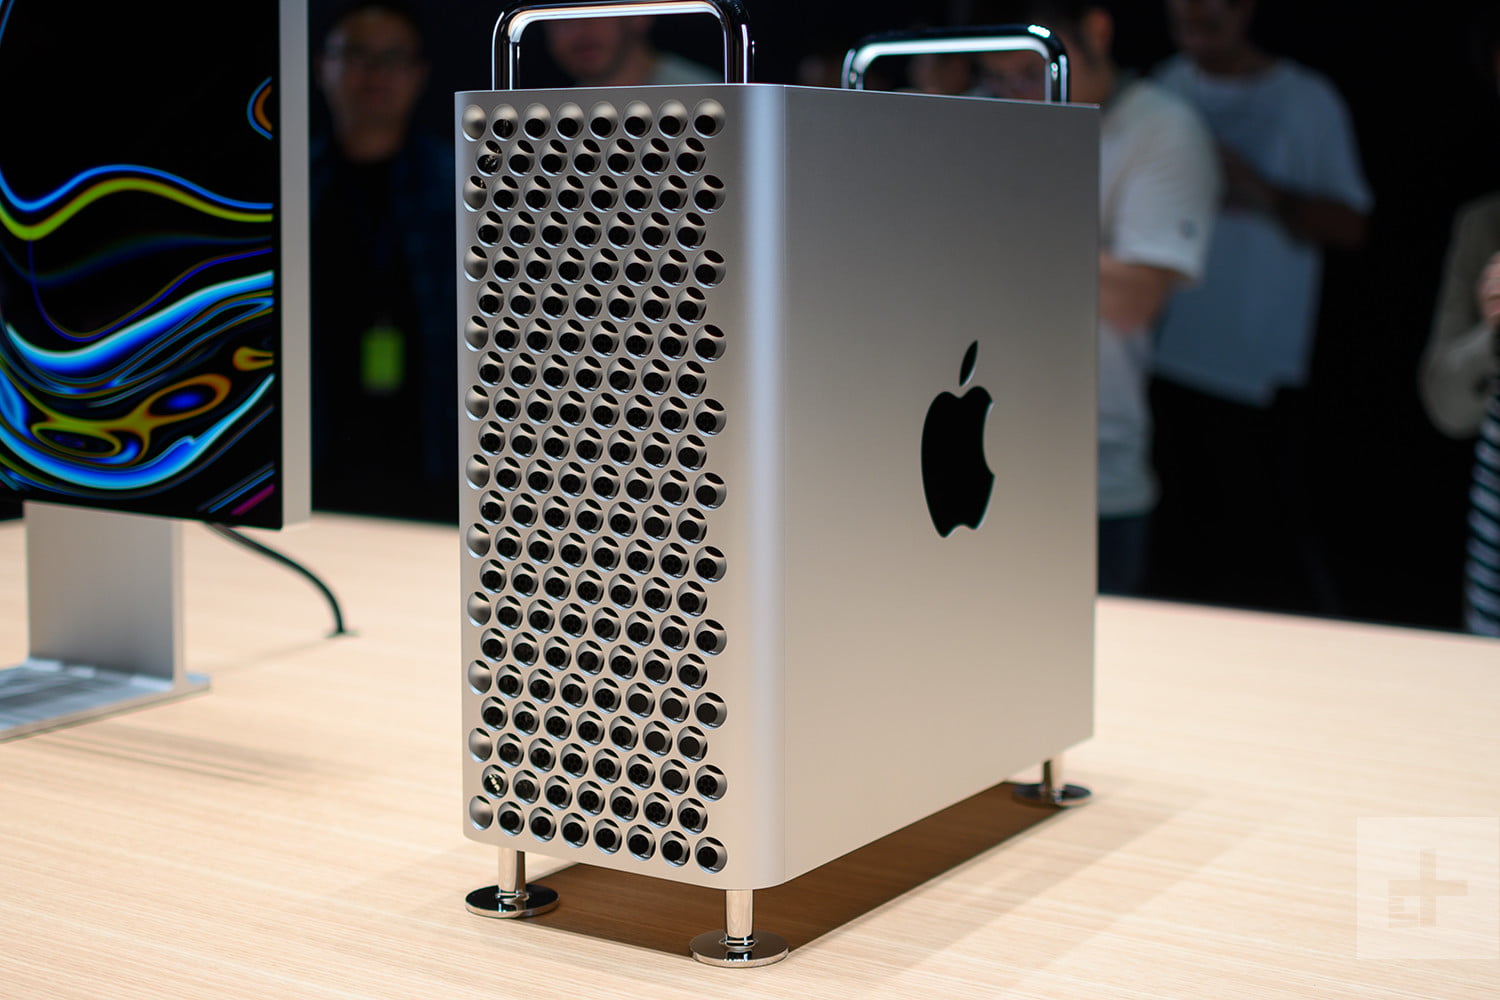 The $6,000 2019 Mac Pro launched at the 2019 Worldwide Developer Conference (WWDC) at McEnery Convention Center in San Jose, California. File Photo